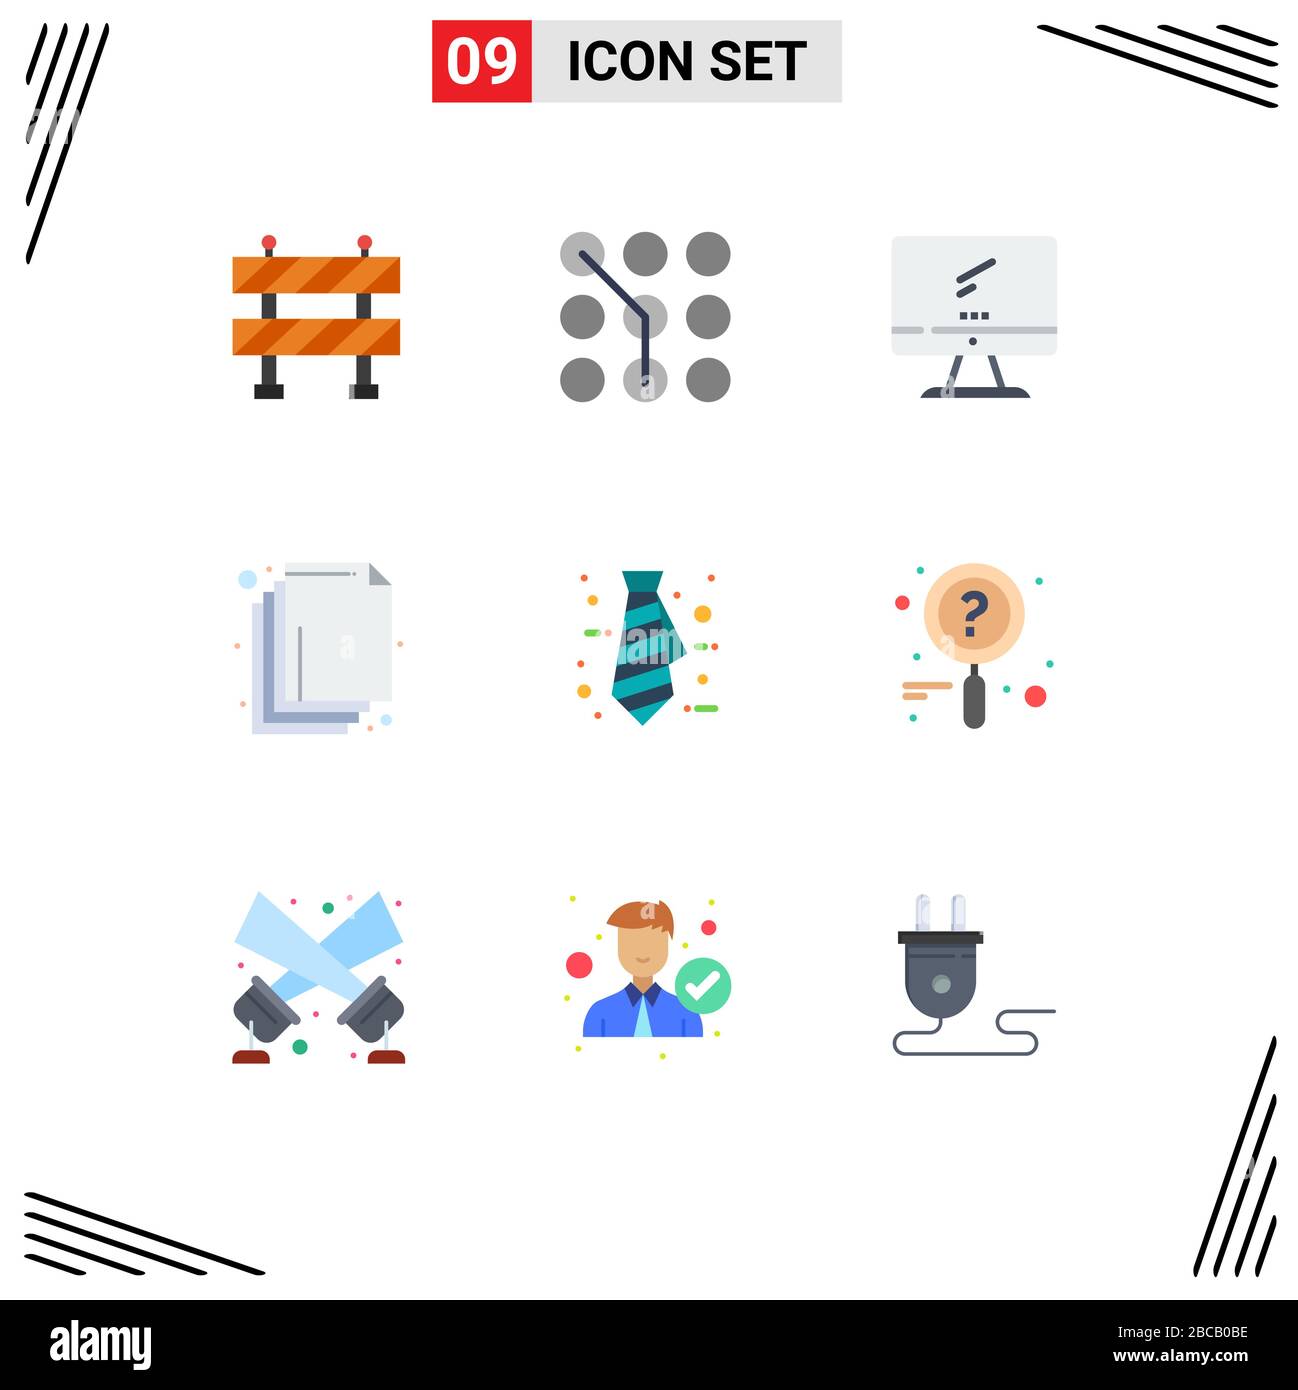 9 Thematic Vector Flat Colors and Editable Symbols of tie, business, monitor, layers, arrange Editable Vector Design Elements Stock Vector